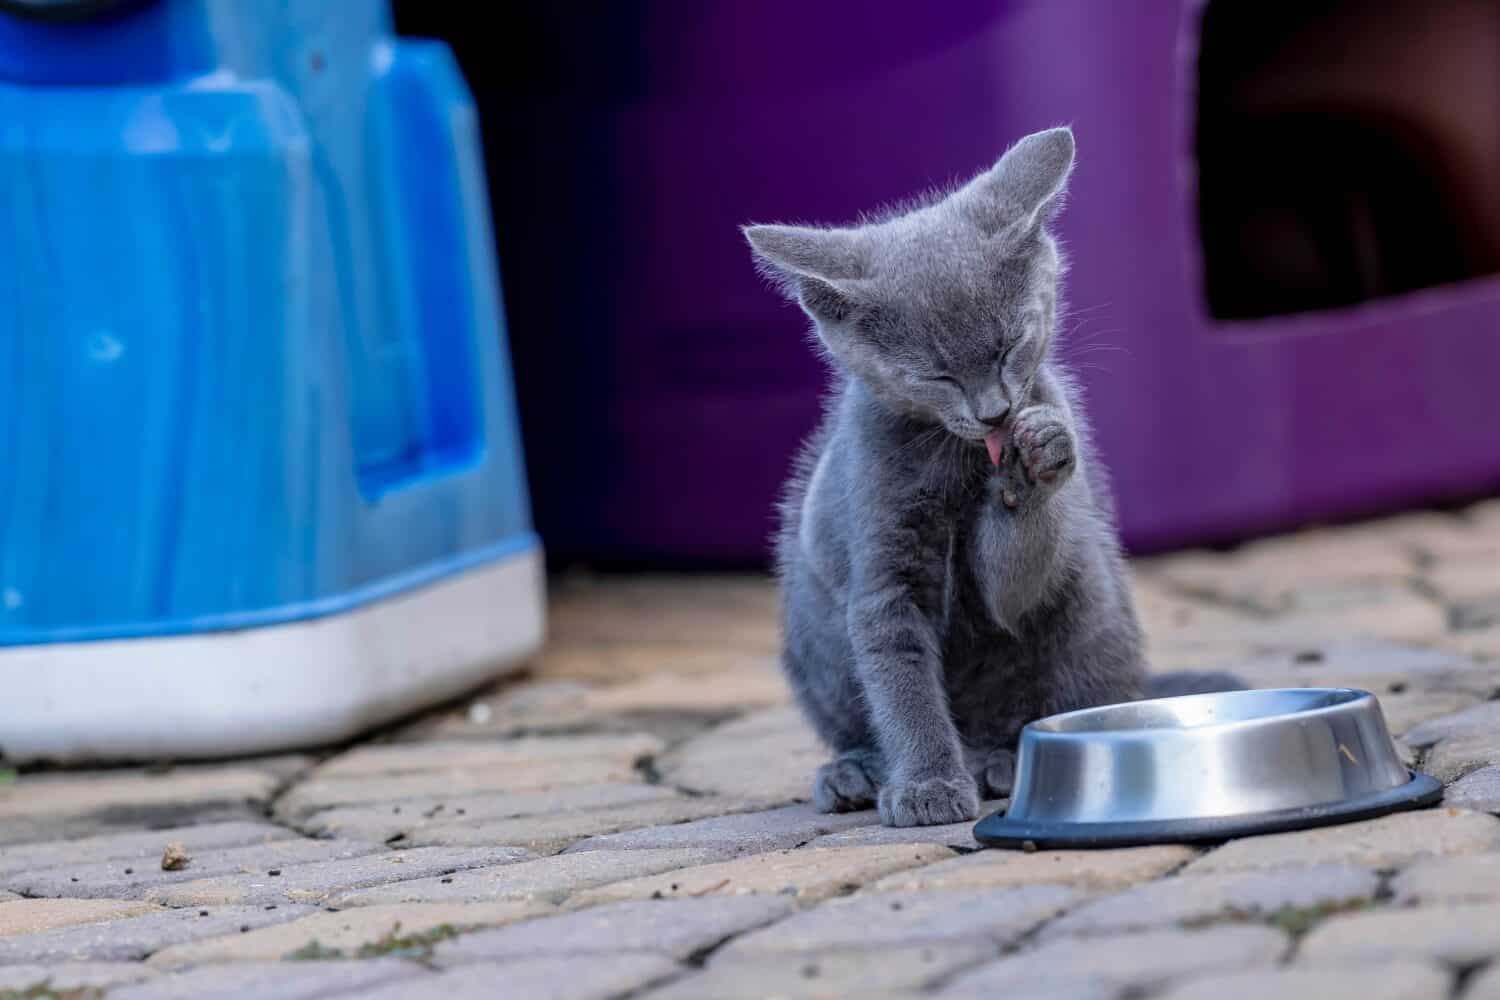 8 week old outside kittens eat their meals and clean themselves afterwards in an urban environment